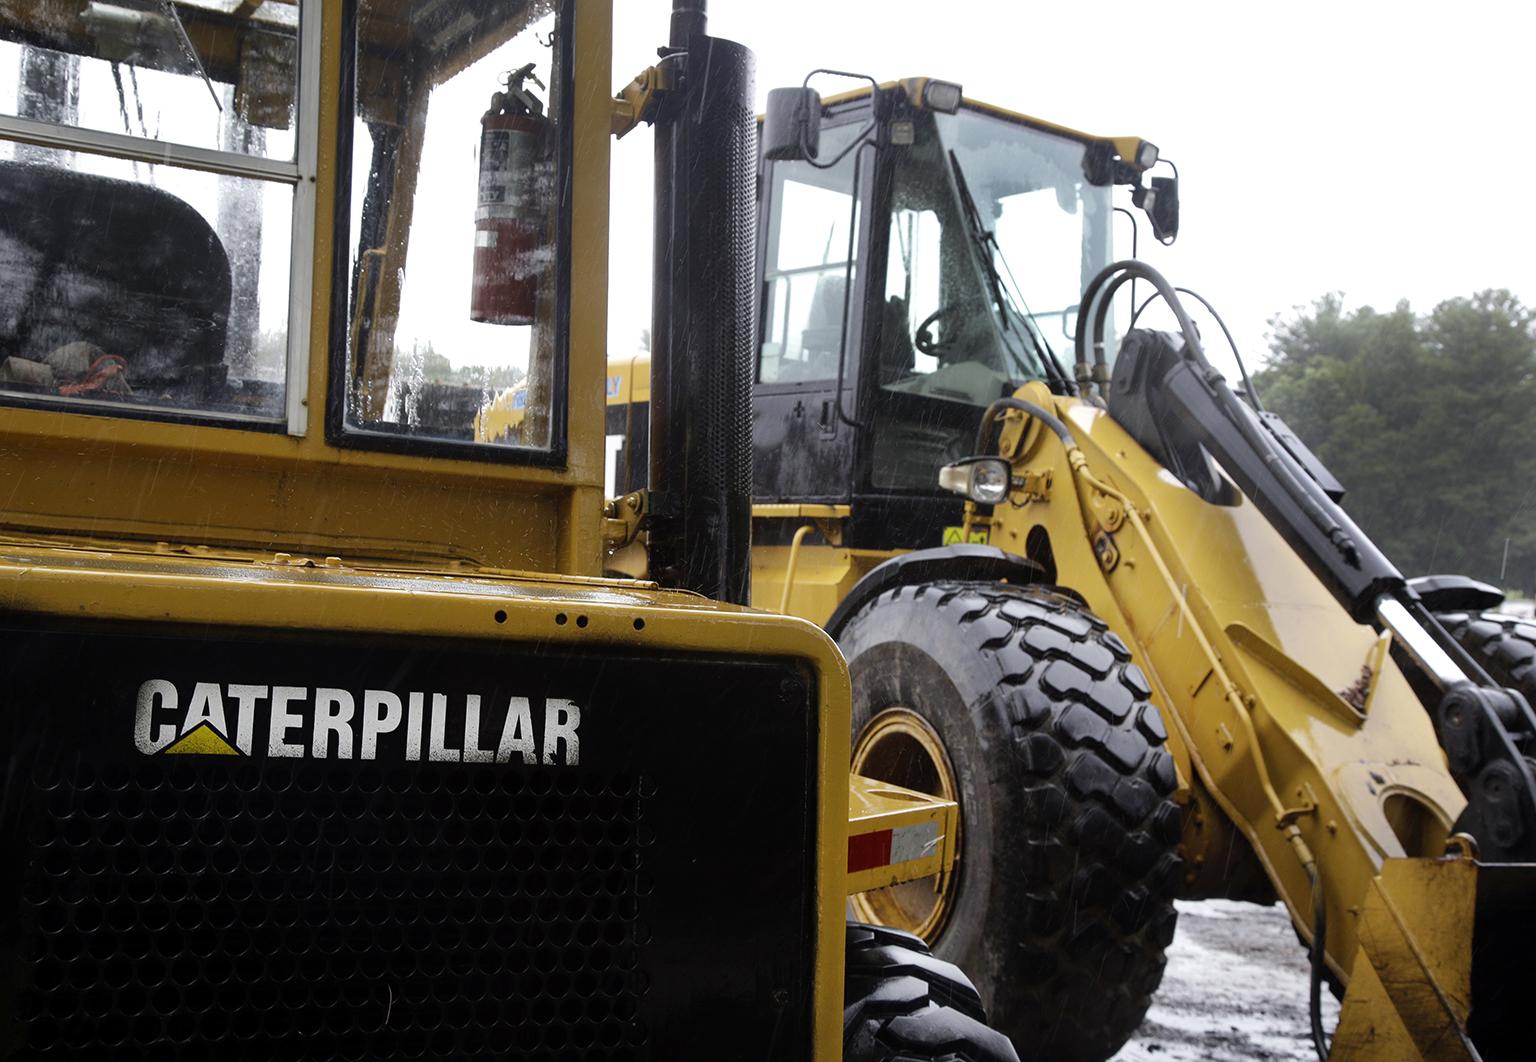 In this Monday, July 24, 2017 file photo, Caterpillar loaders are parked in Middleton, Massachusetts.  (AP Photo / Elise Amendola) 